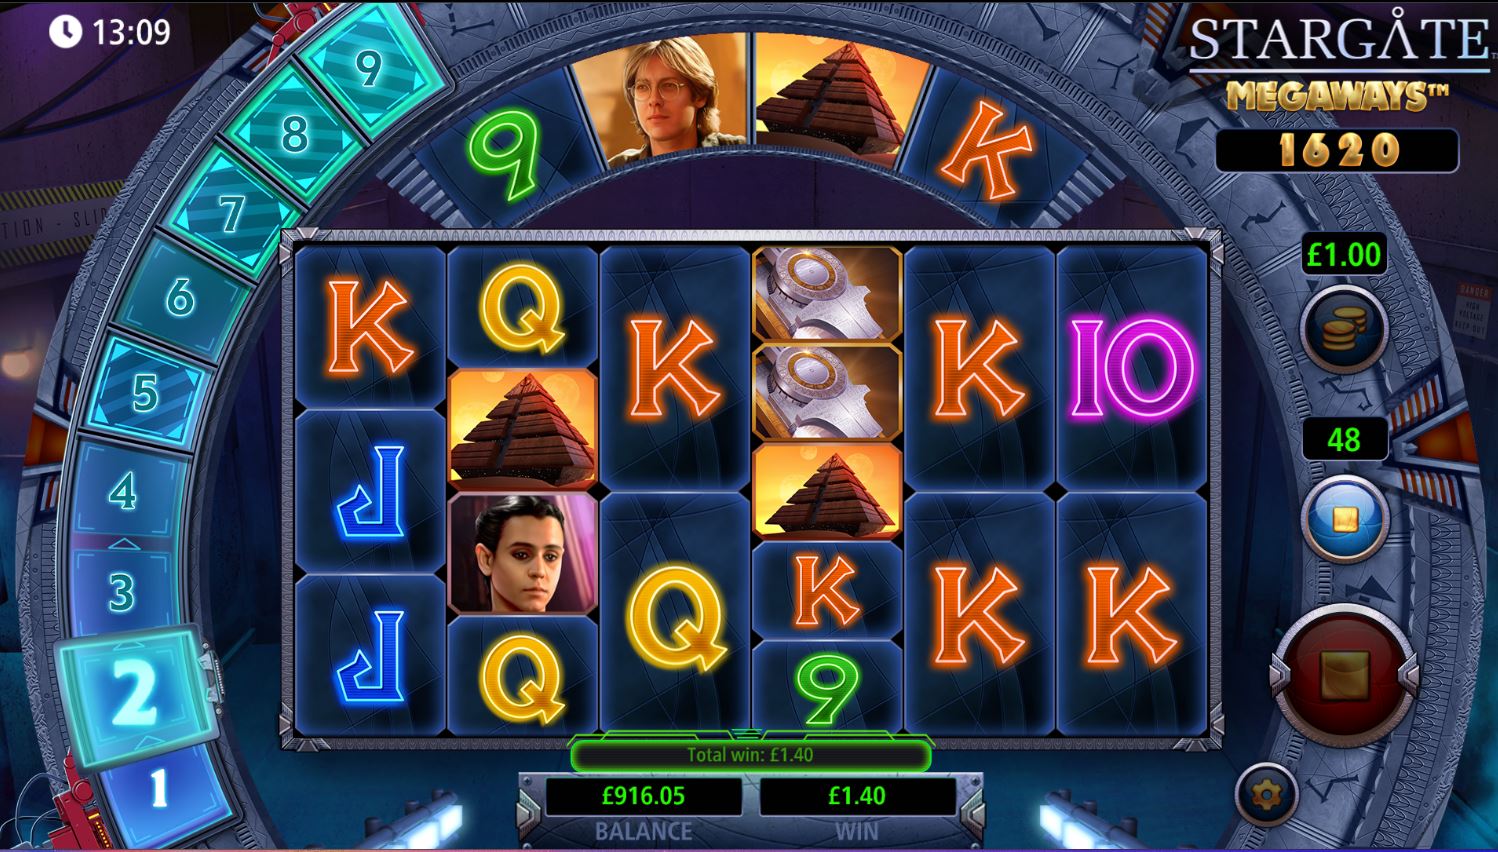 WINNING on a NEW GAME with Stargate Megaways Slot Play -- Round 81: Double 19, Nothing 62